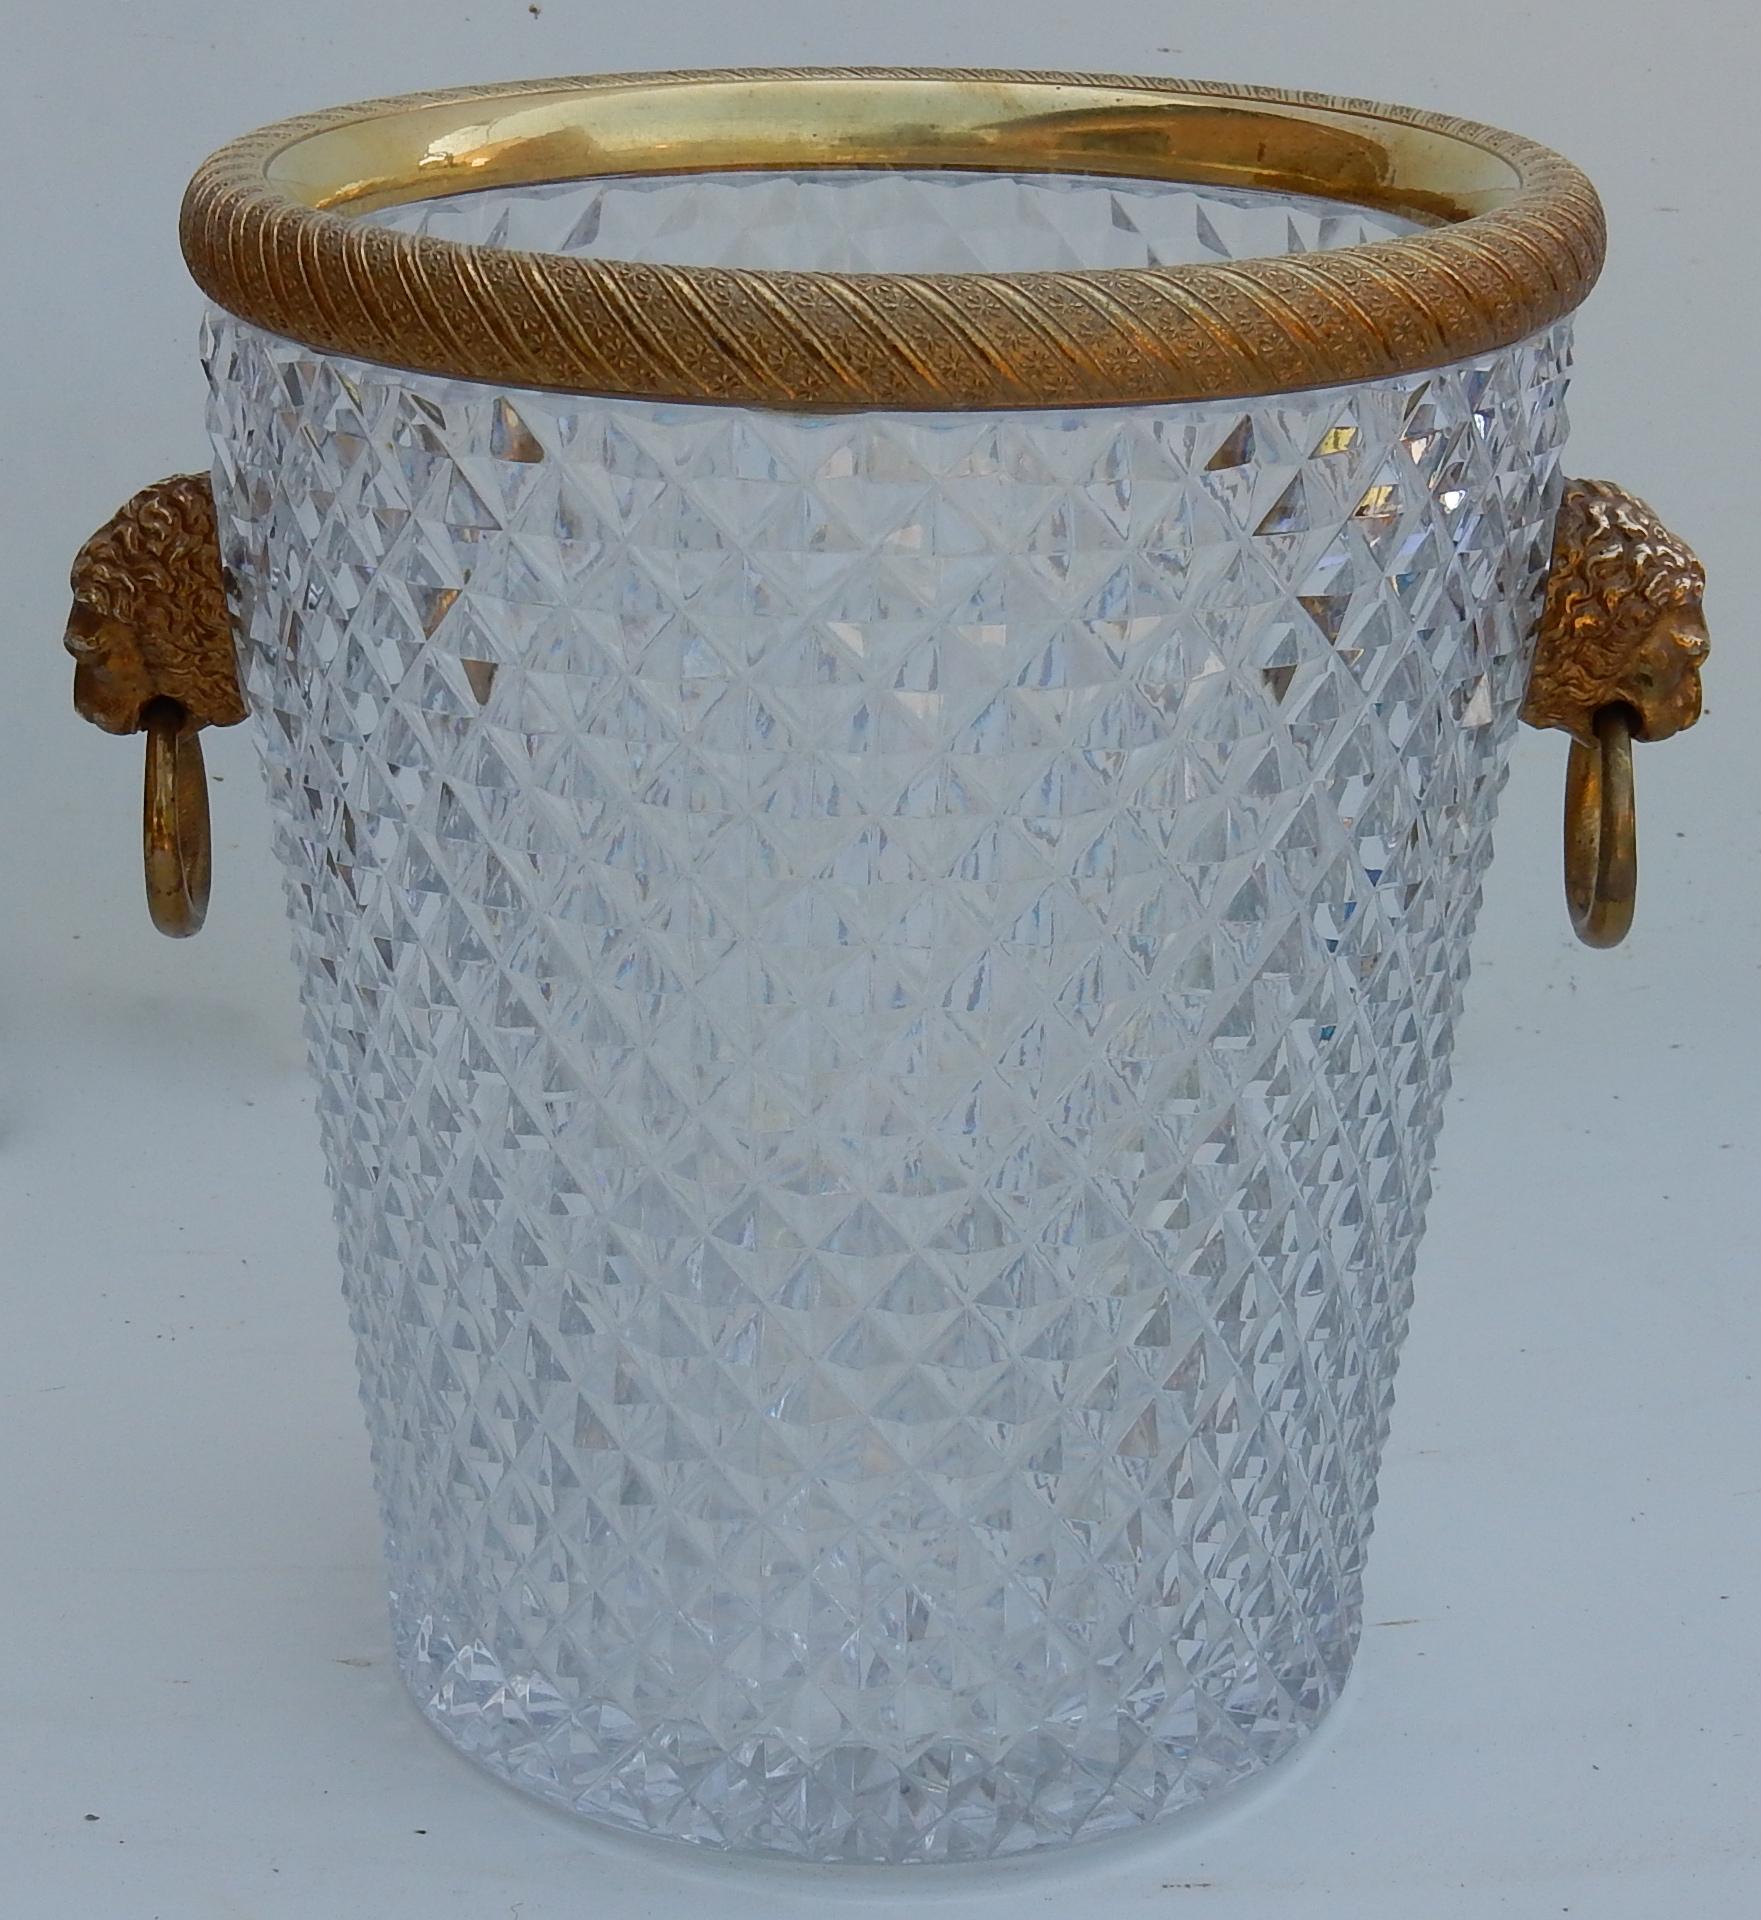 Champagne bucket clock of diamond and golden guilloché bronze, in the style of St Louis no signed
Good condition.